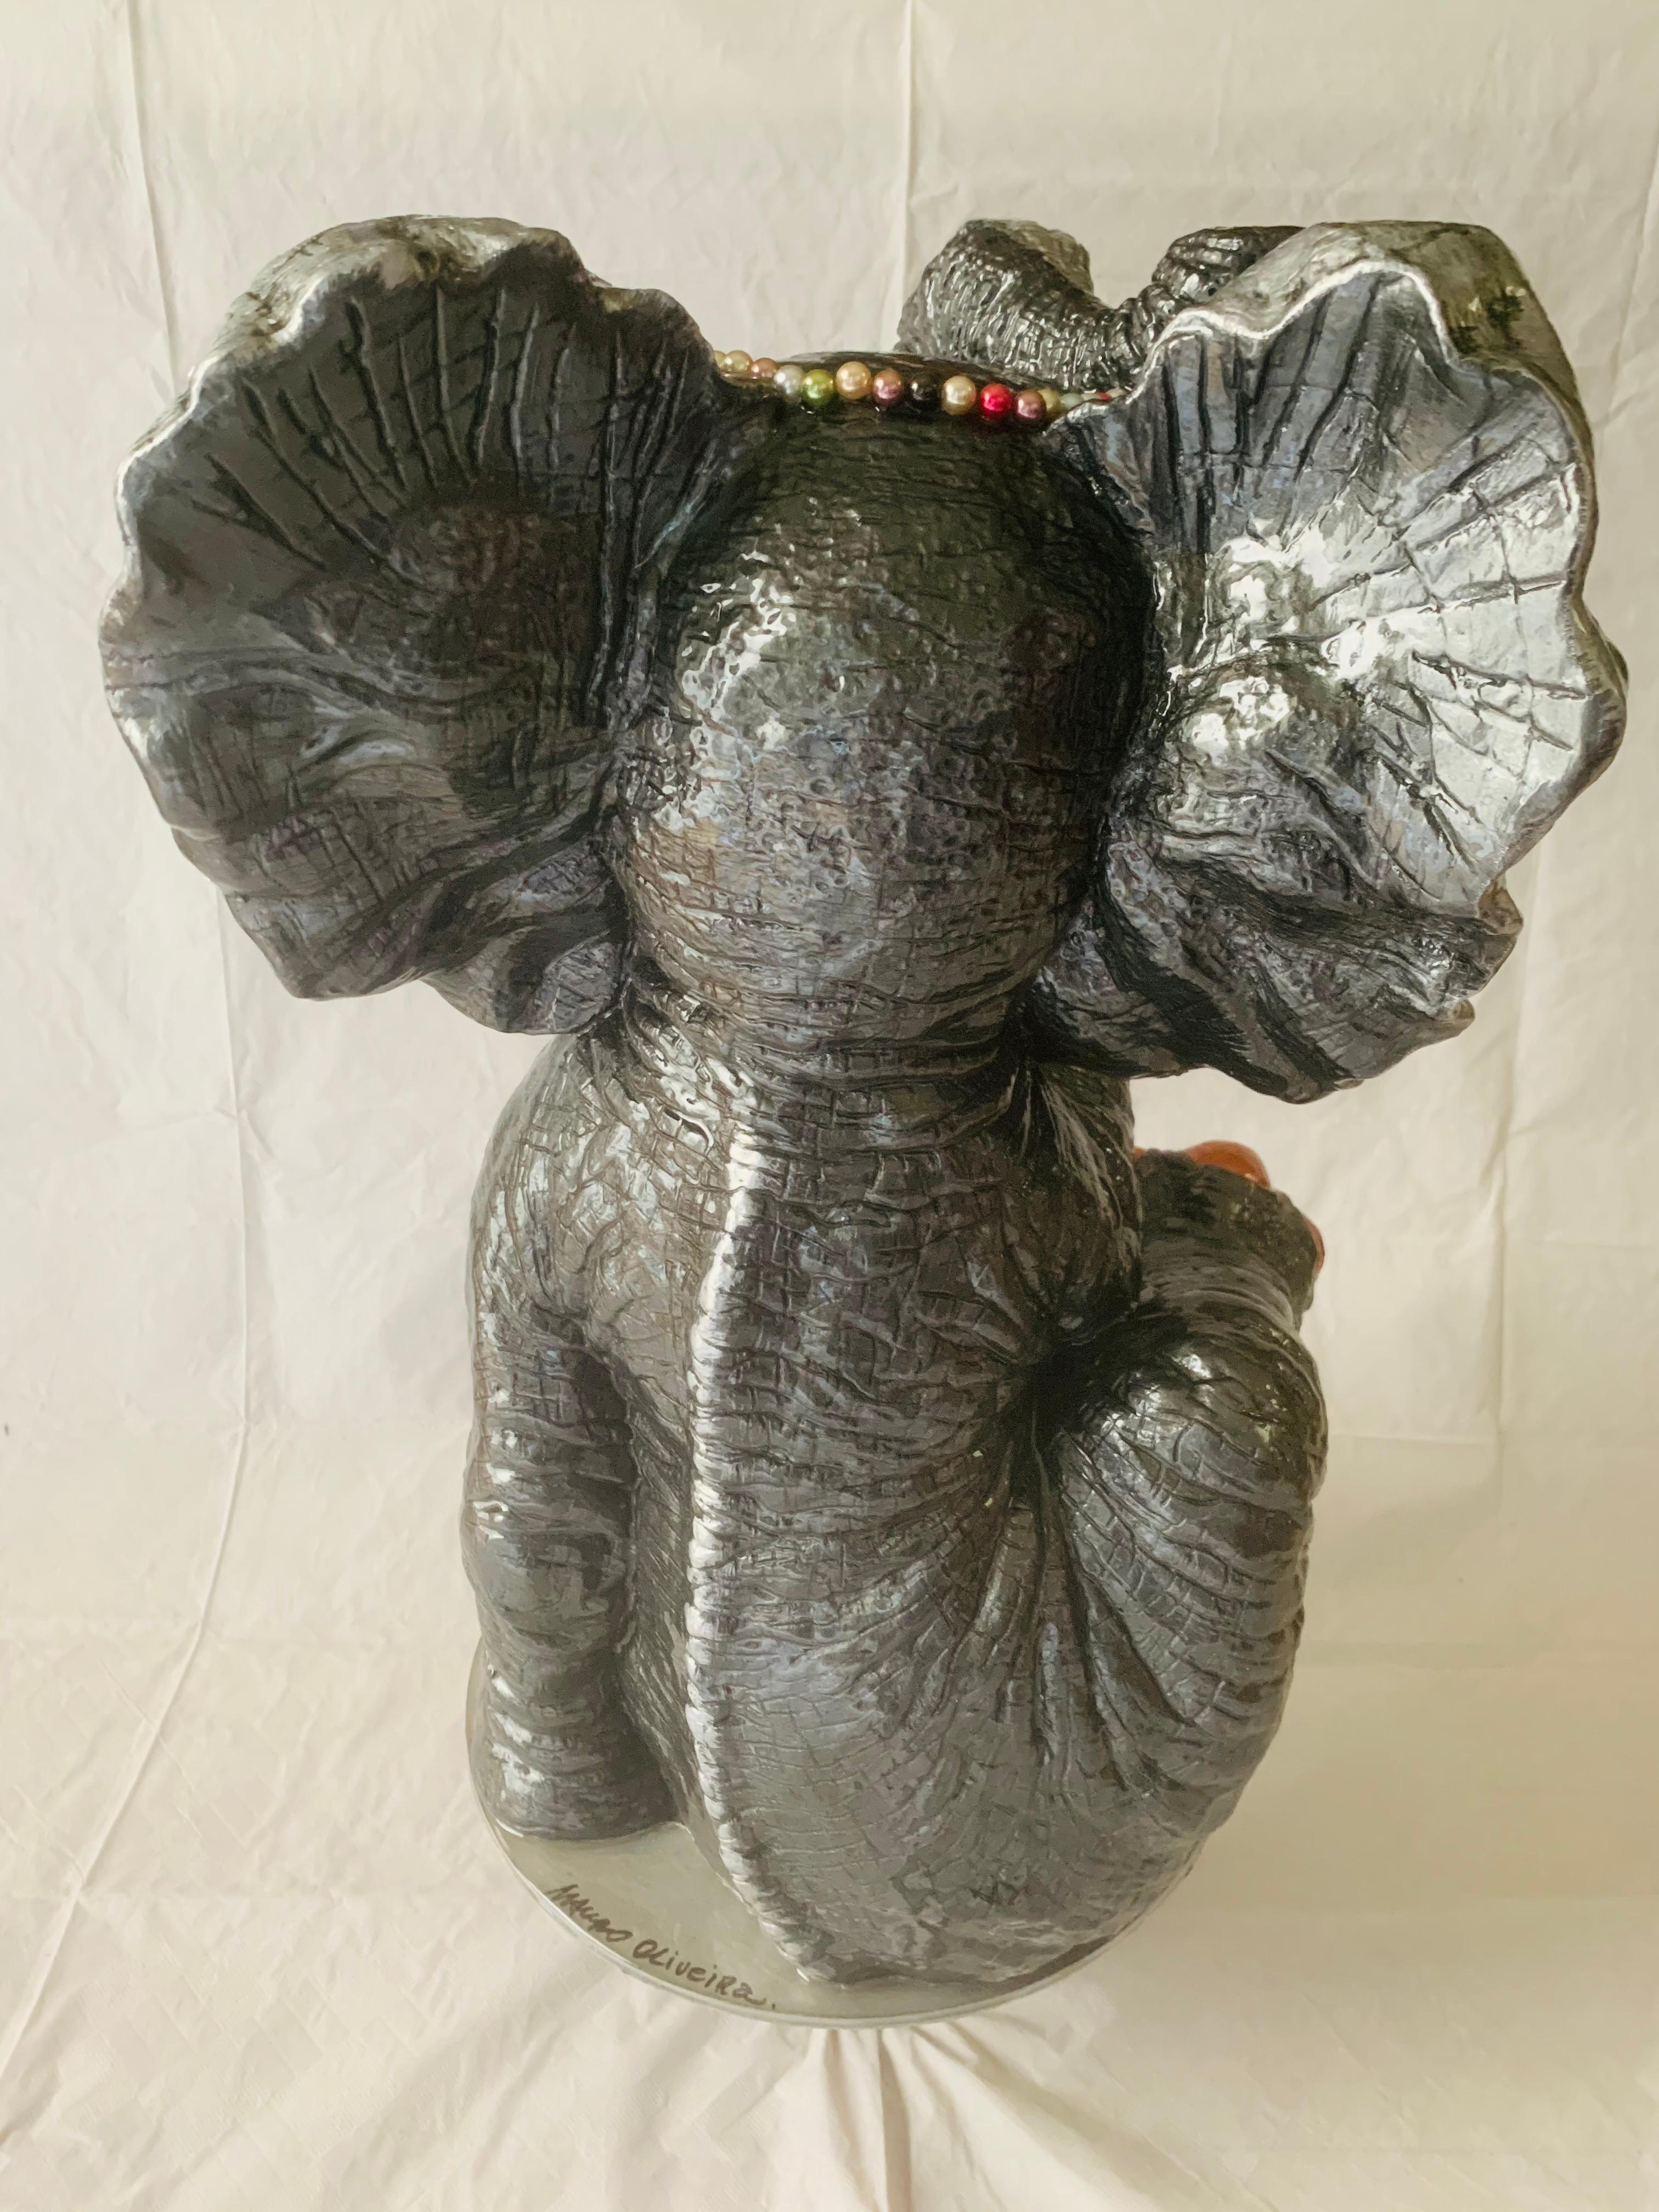 Lucky Baby Elephant I (Original Elephant Sculpture - Charcoal) - Brown Figurative Sculpture by Mauro Oliveira